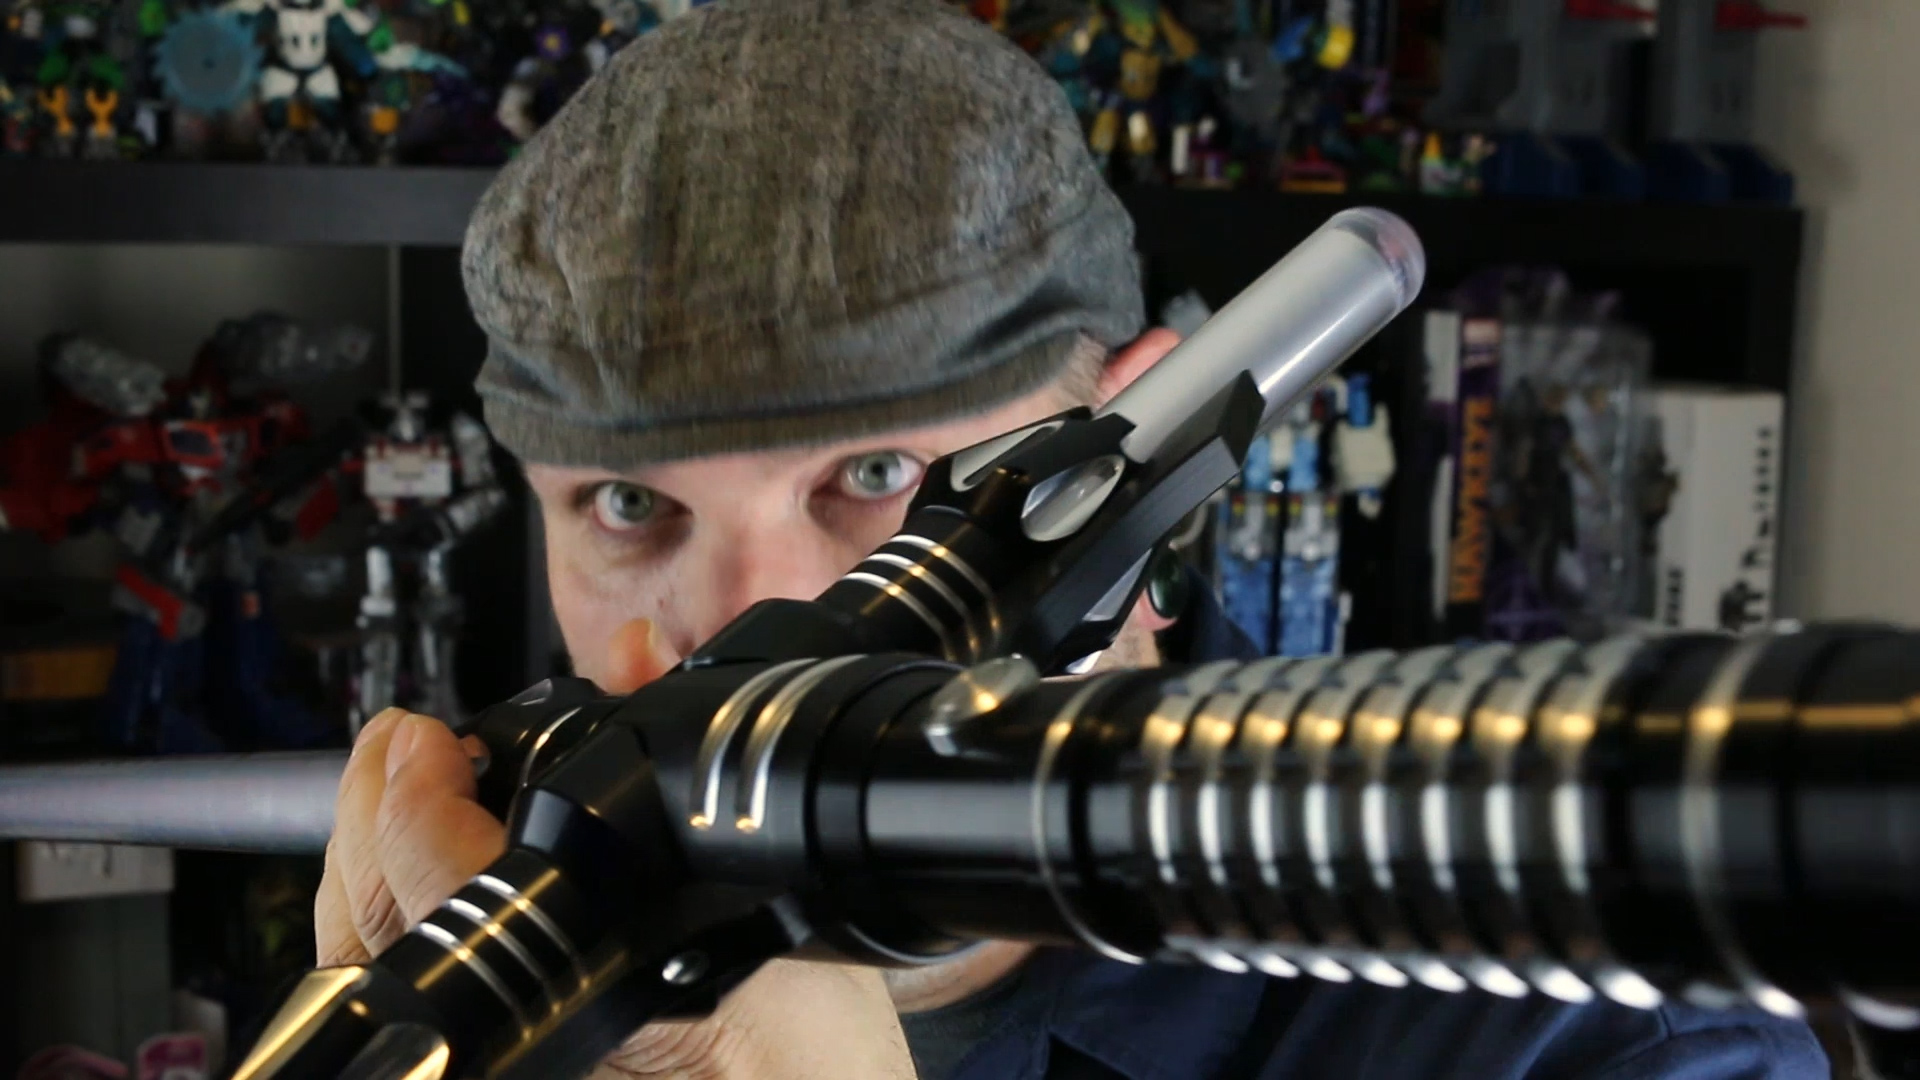 Toy Time Wields UltraSabers’ Renegade Combat Lightsaber